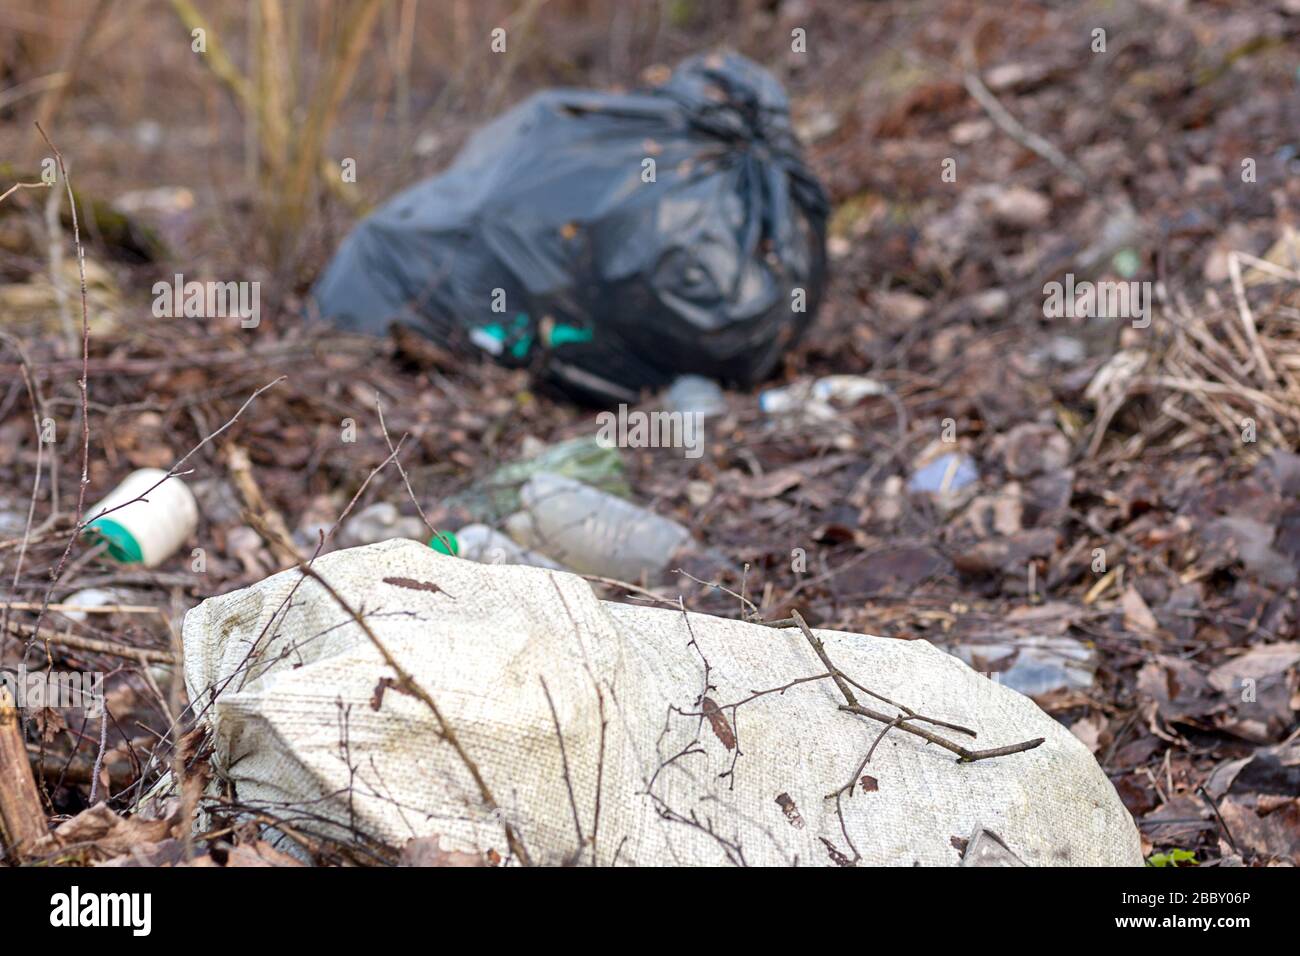 bags with garbage left in the forest Stock Photo